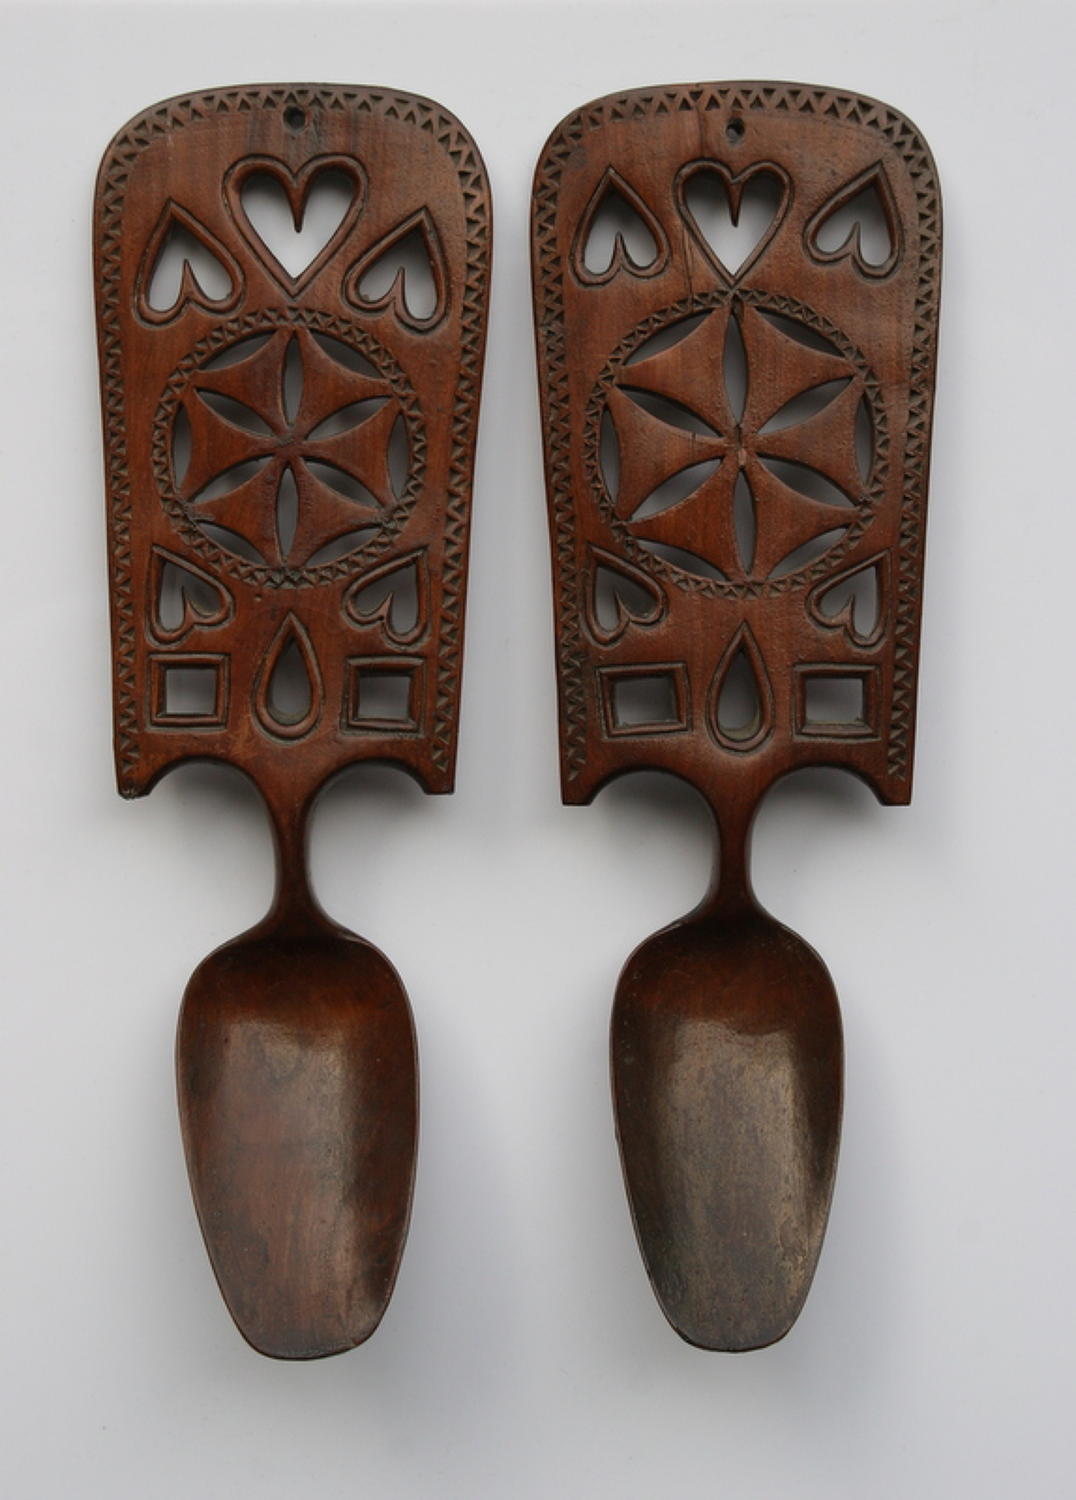 A pair of Welsh love Spoons 19th Century